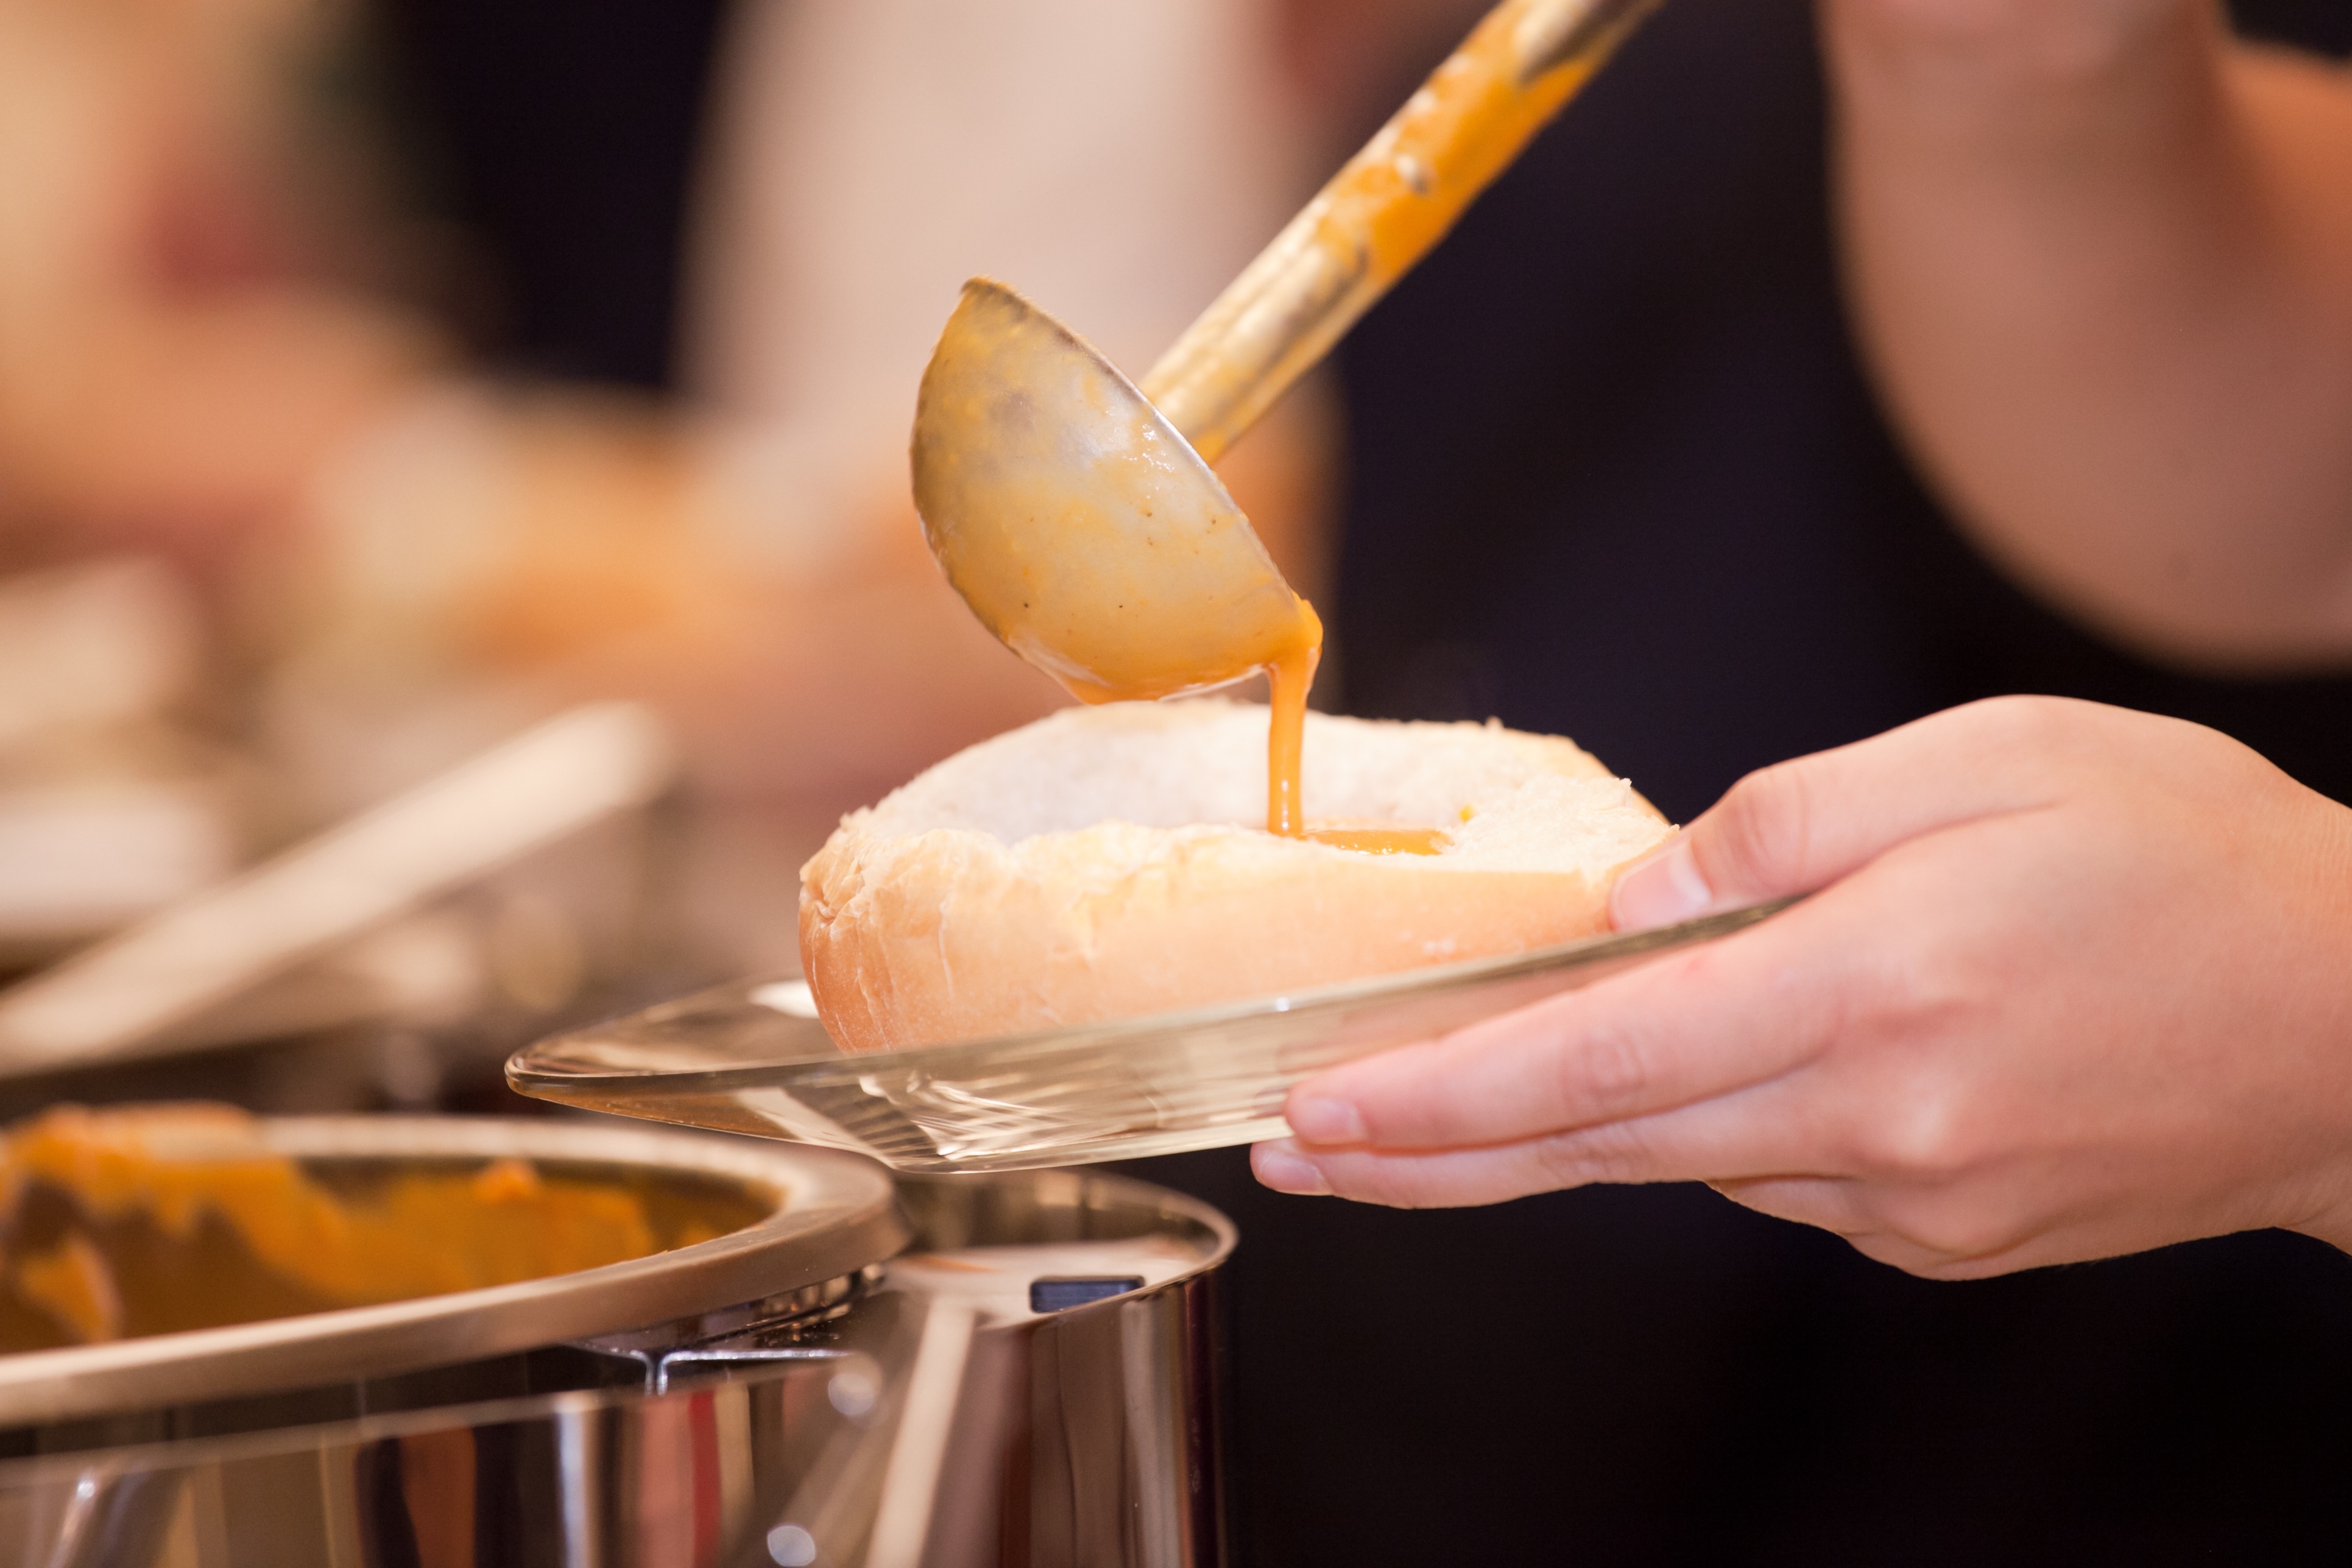 soup being poured into bread bowl